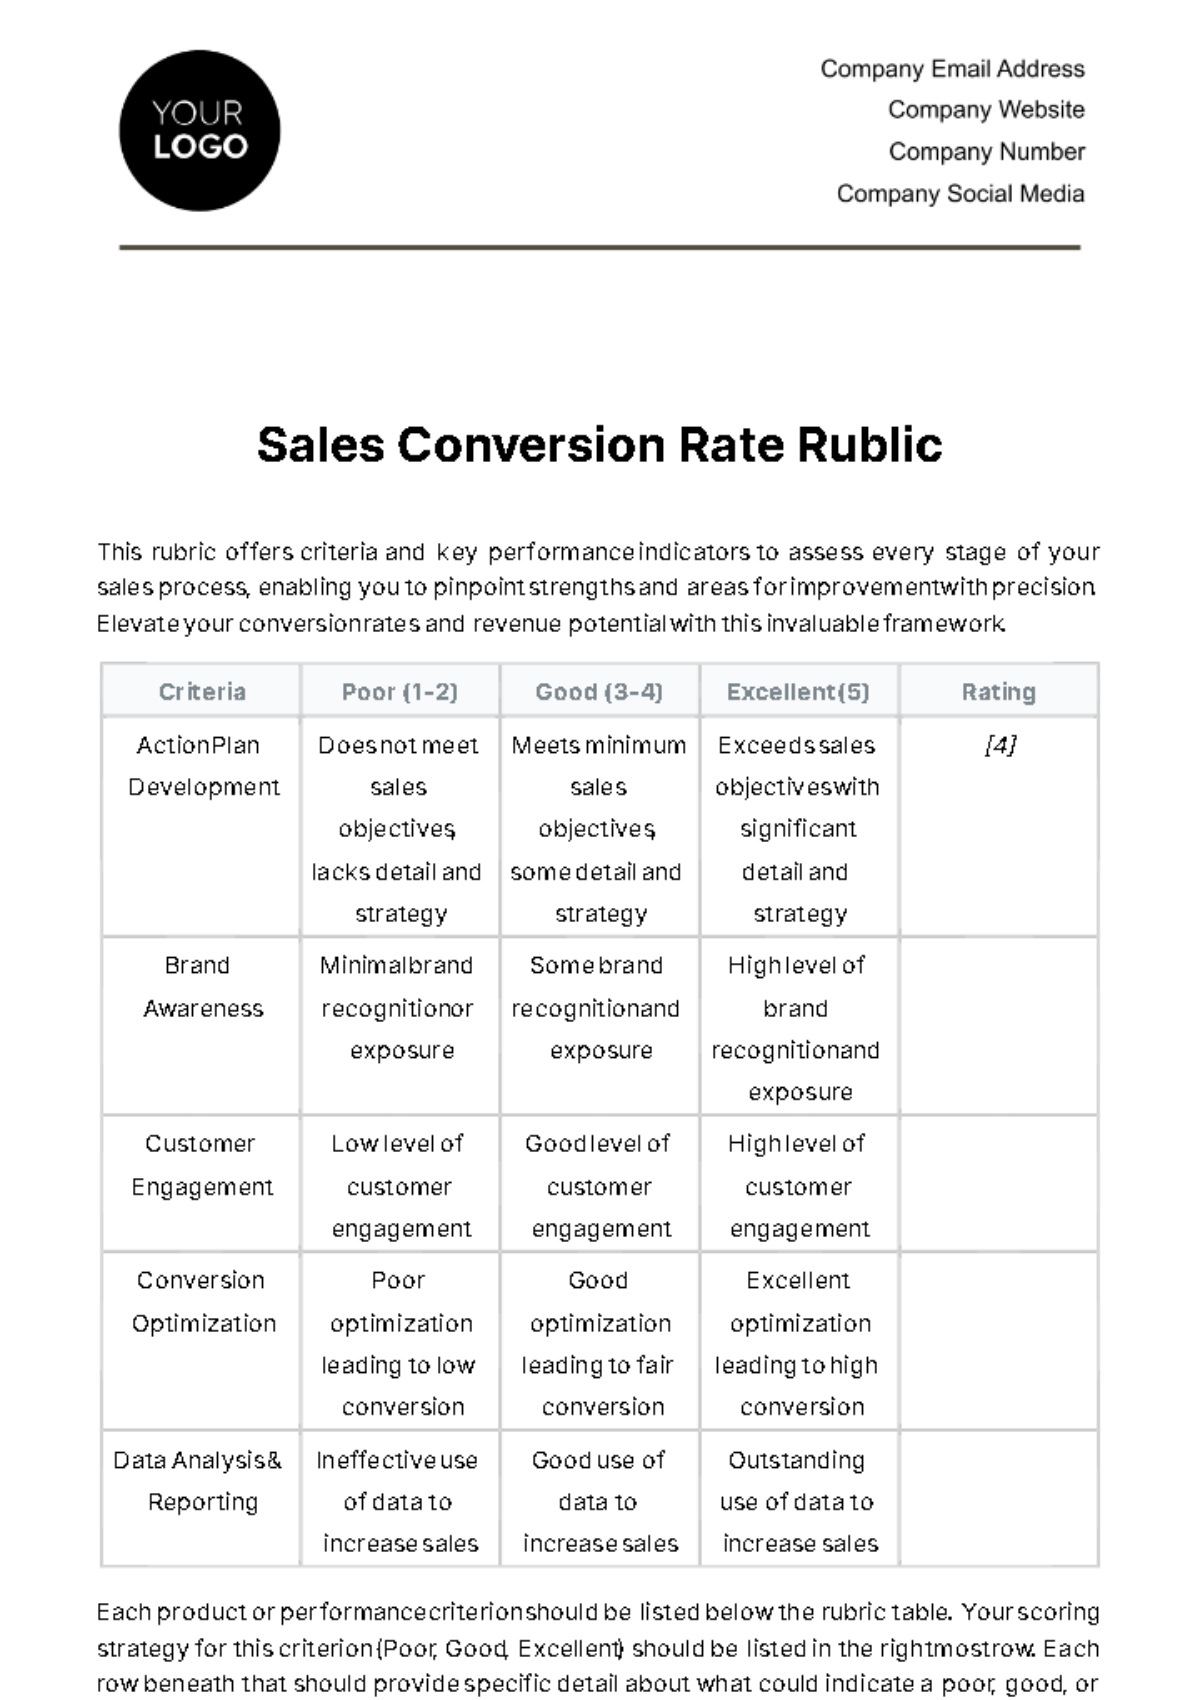 Free Sales Conversion Rate Rubric Template